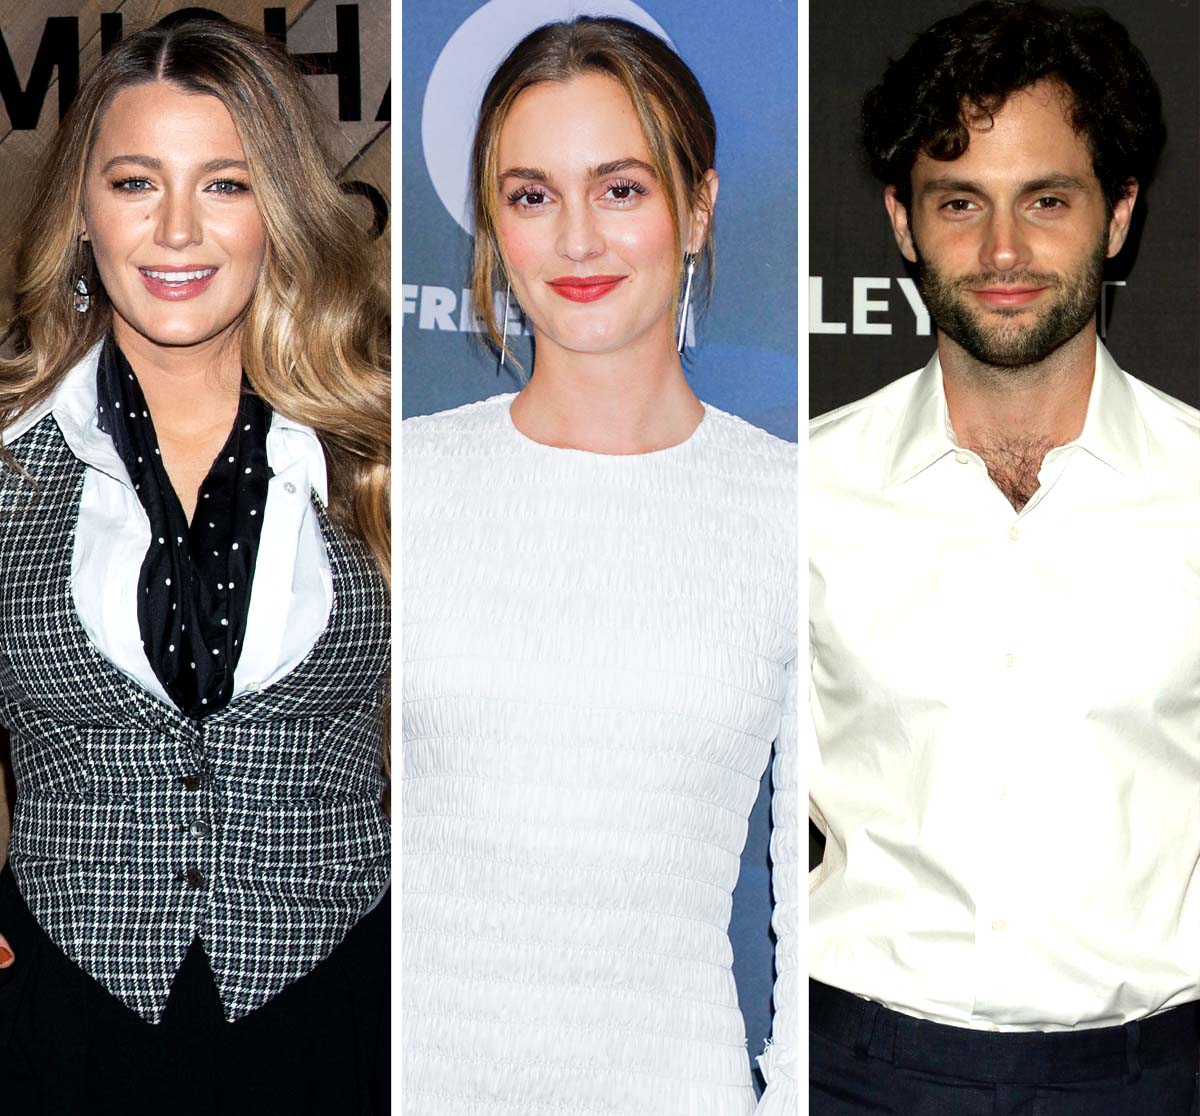 Gossip Girl 10 Years Later: Blake Lively, Leighton Meester, and